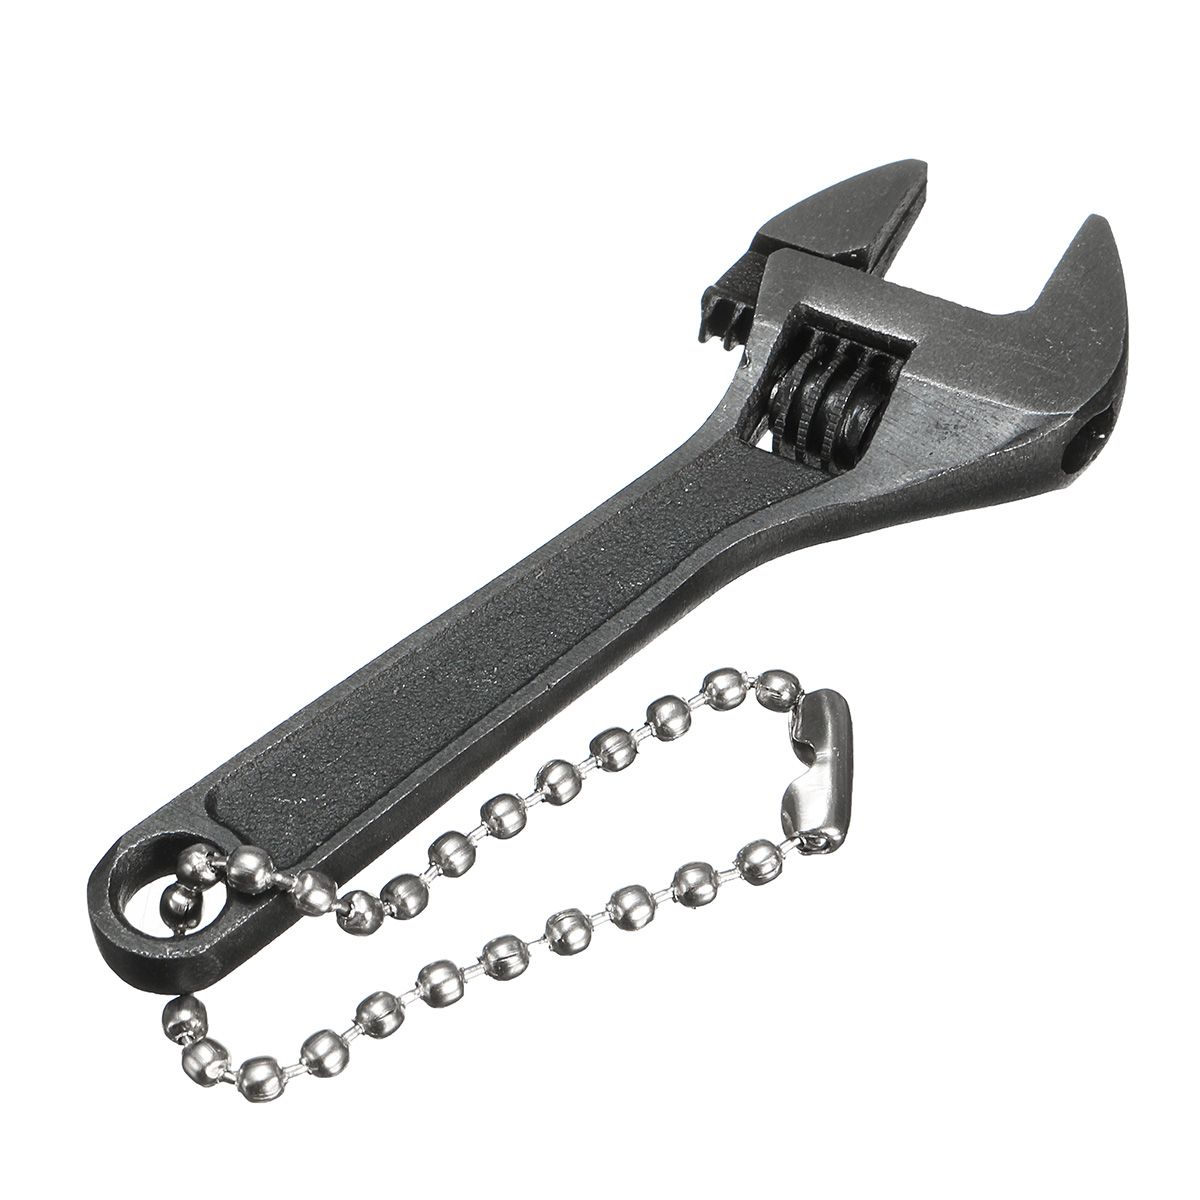 25inch-Mini-Metal-Adjustable-Wrench-Hand-Tool-0-10mm-Jaw-Spanner-Carbon-Steel-1081280